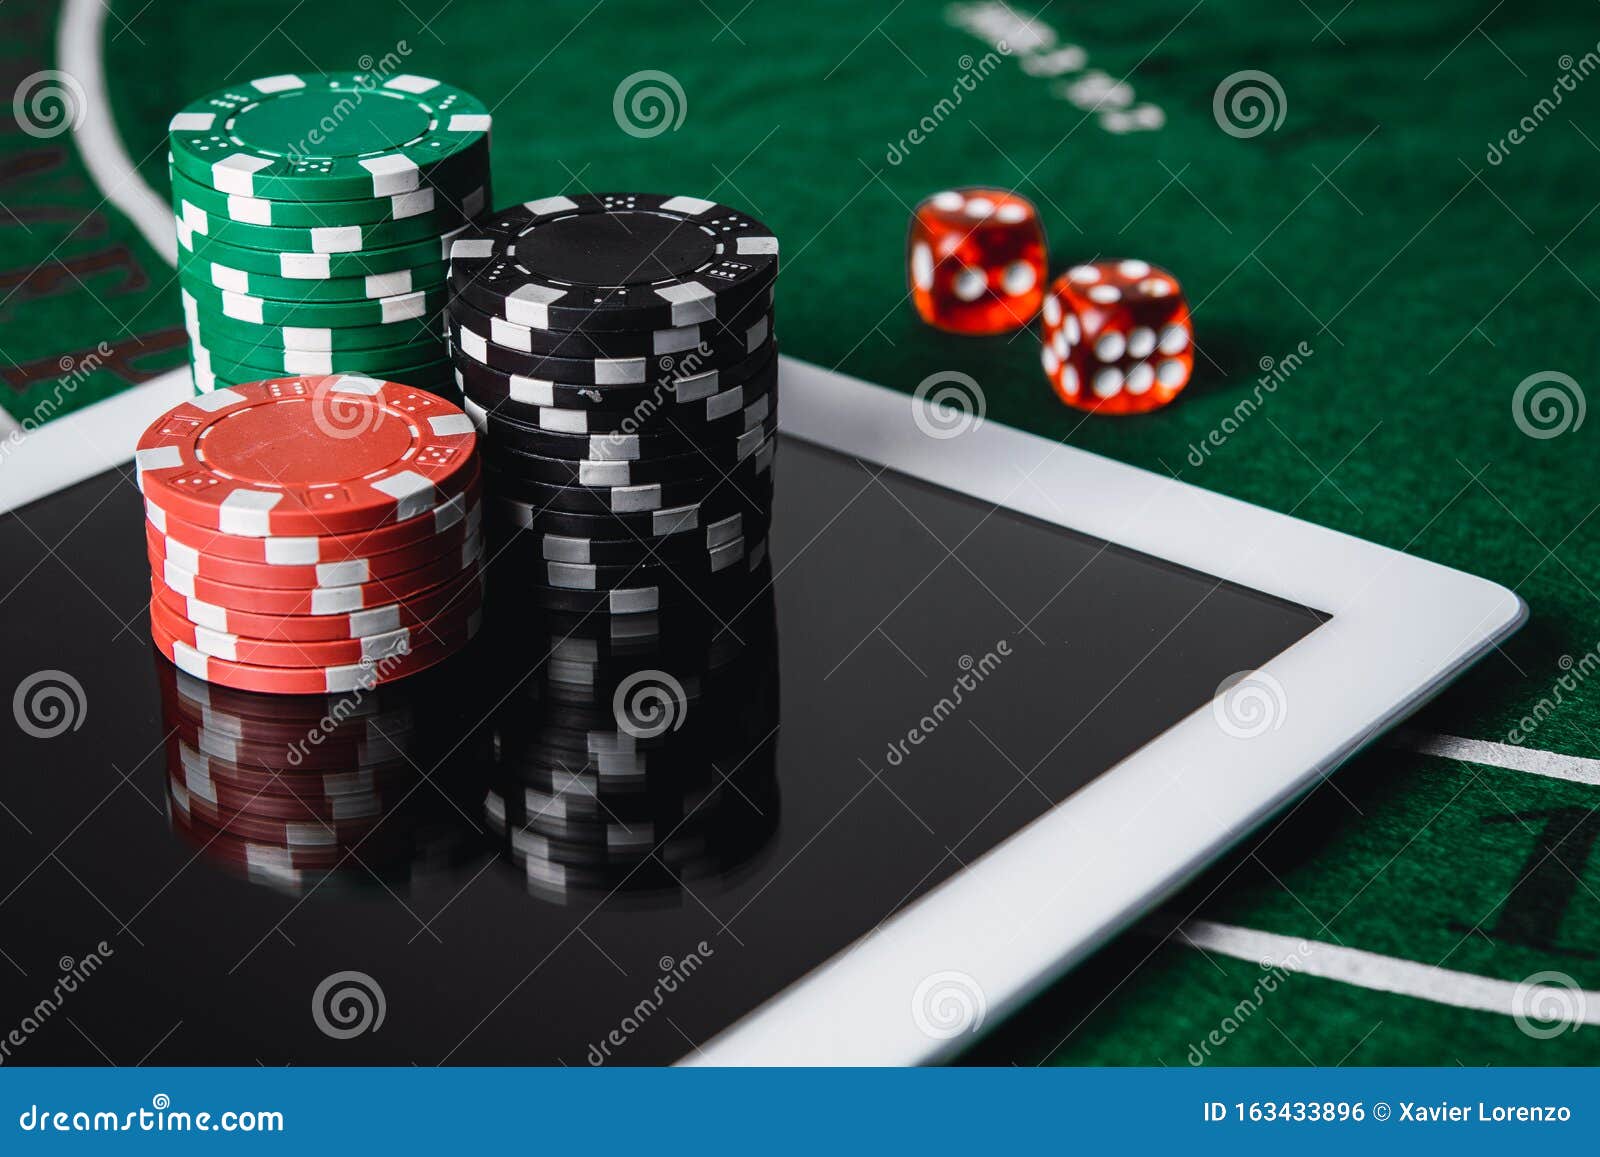 Top 10 Tips To Grow Your play poker online